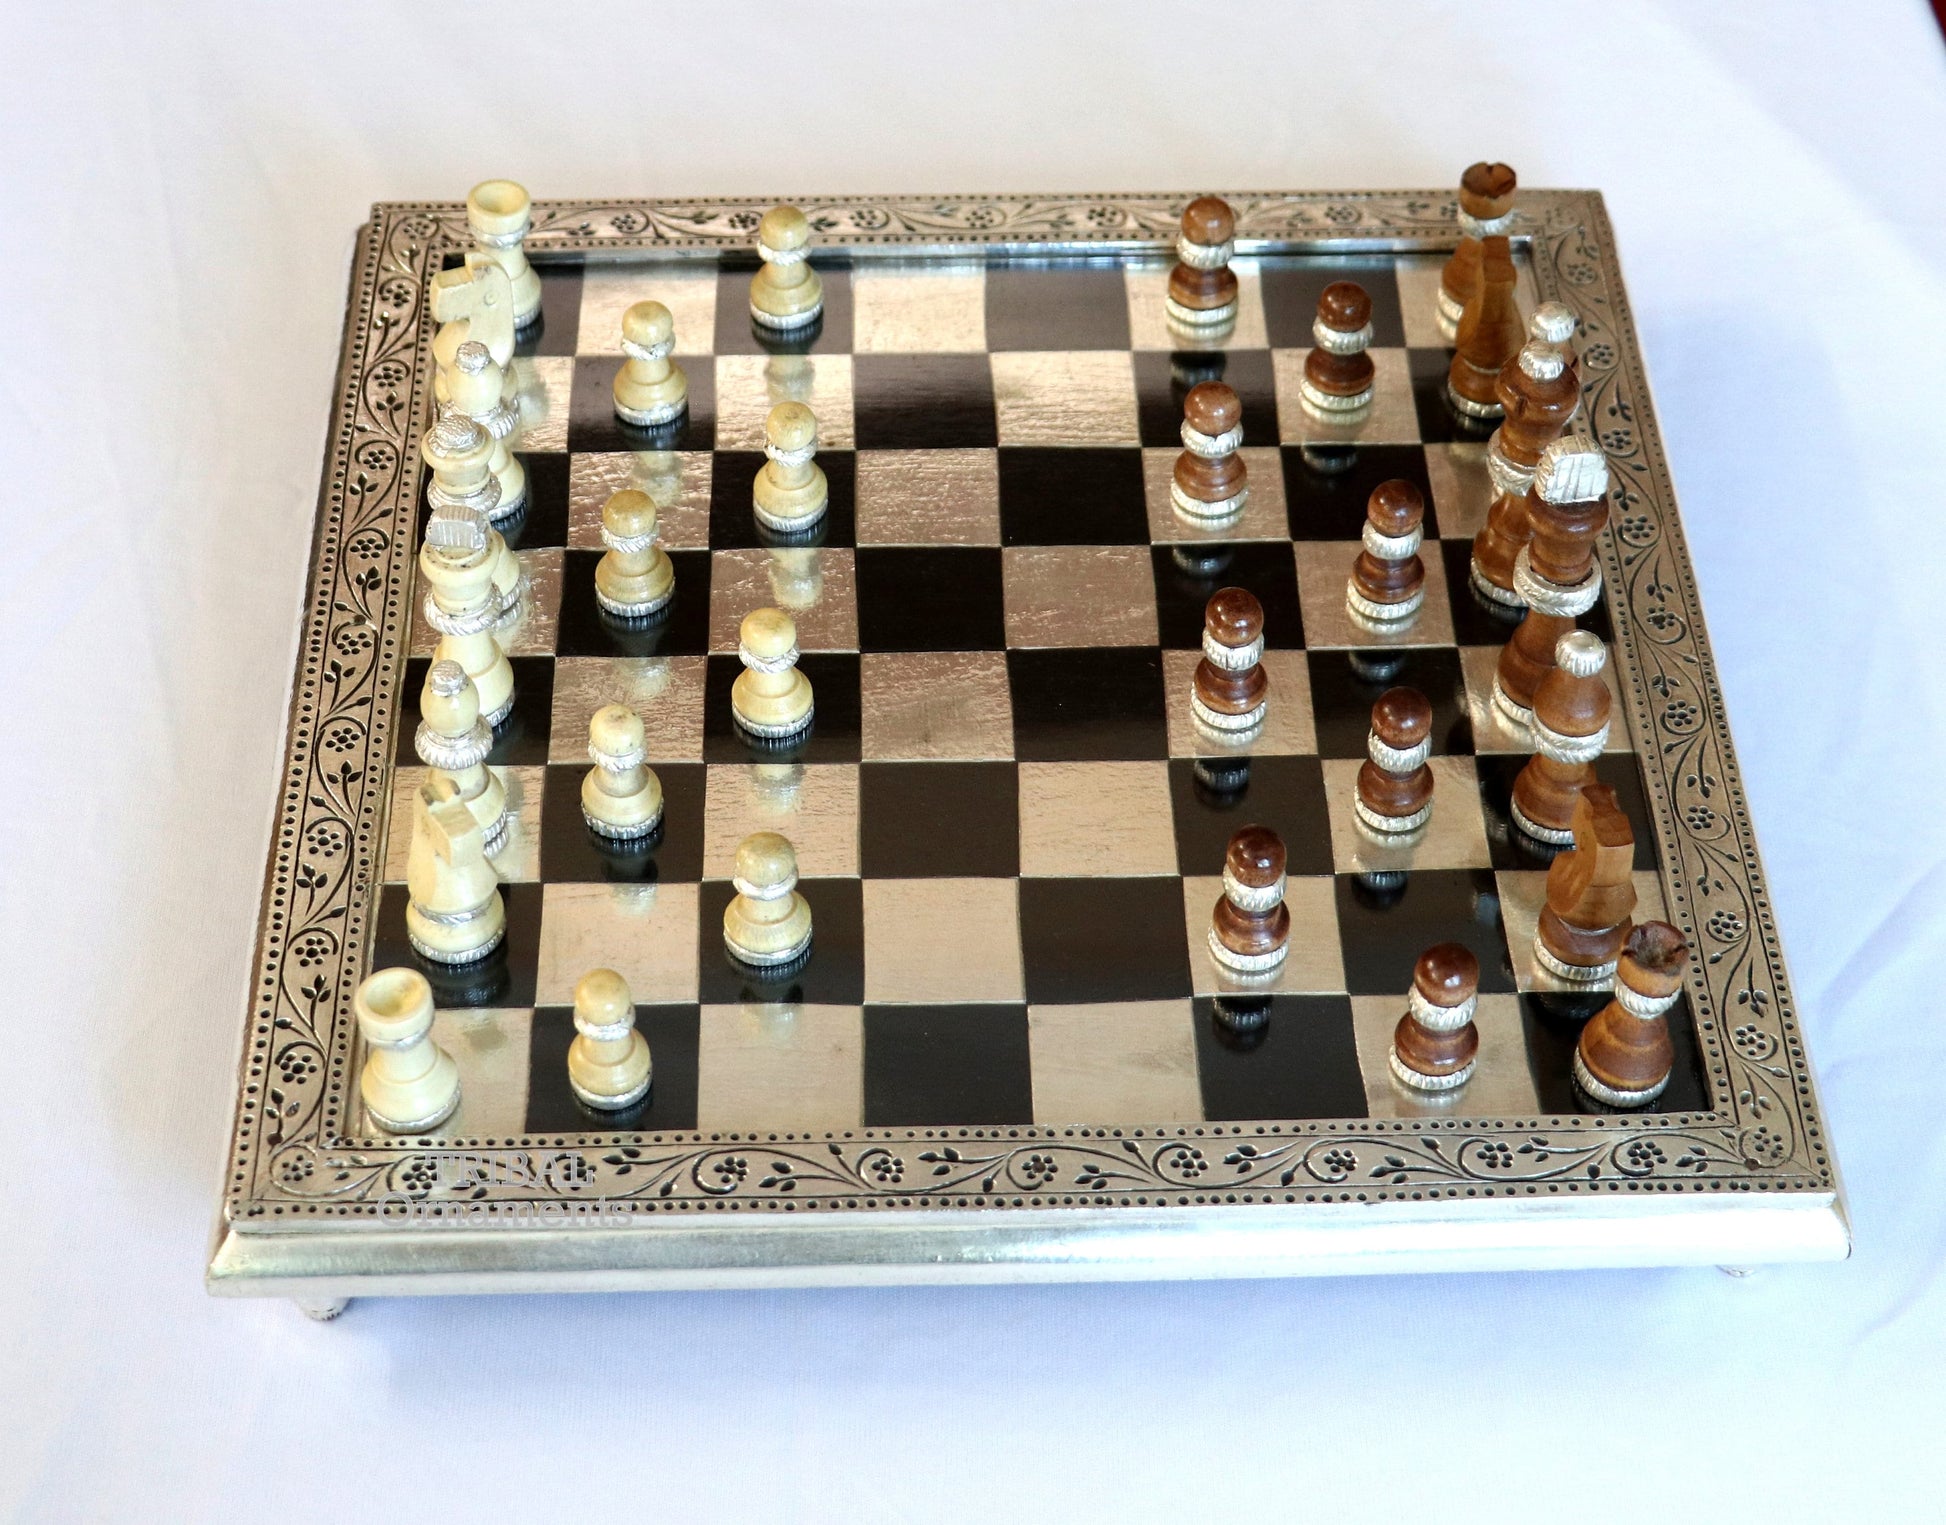 925 sterling silver work chessboard, Amazing customized handcrafted design on wooden base, fabulous Royal silver article from india fr11 - TRIBAL ORNAMENTS